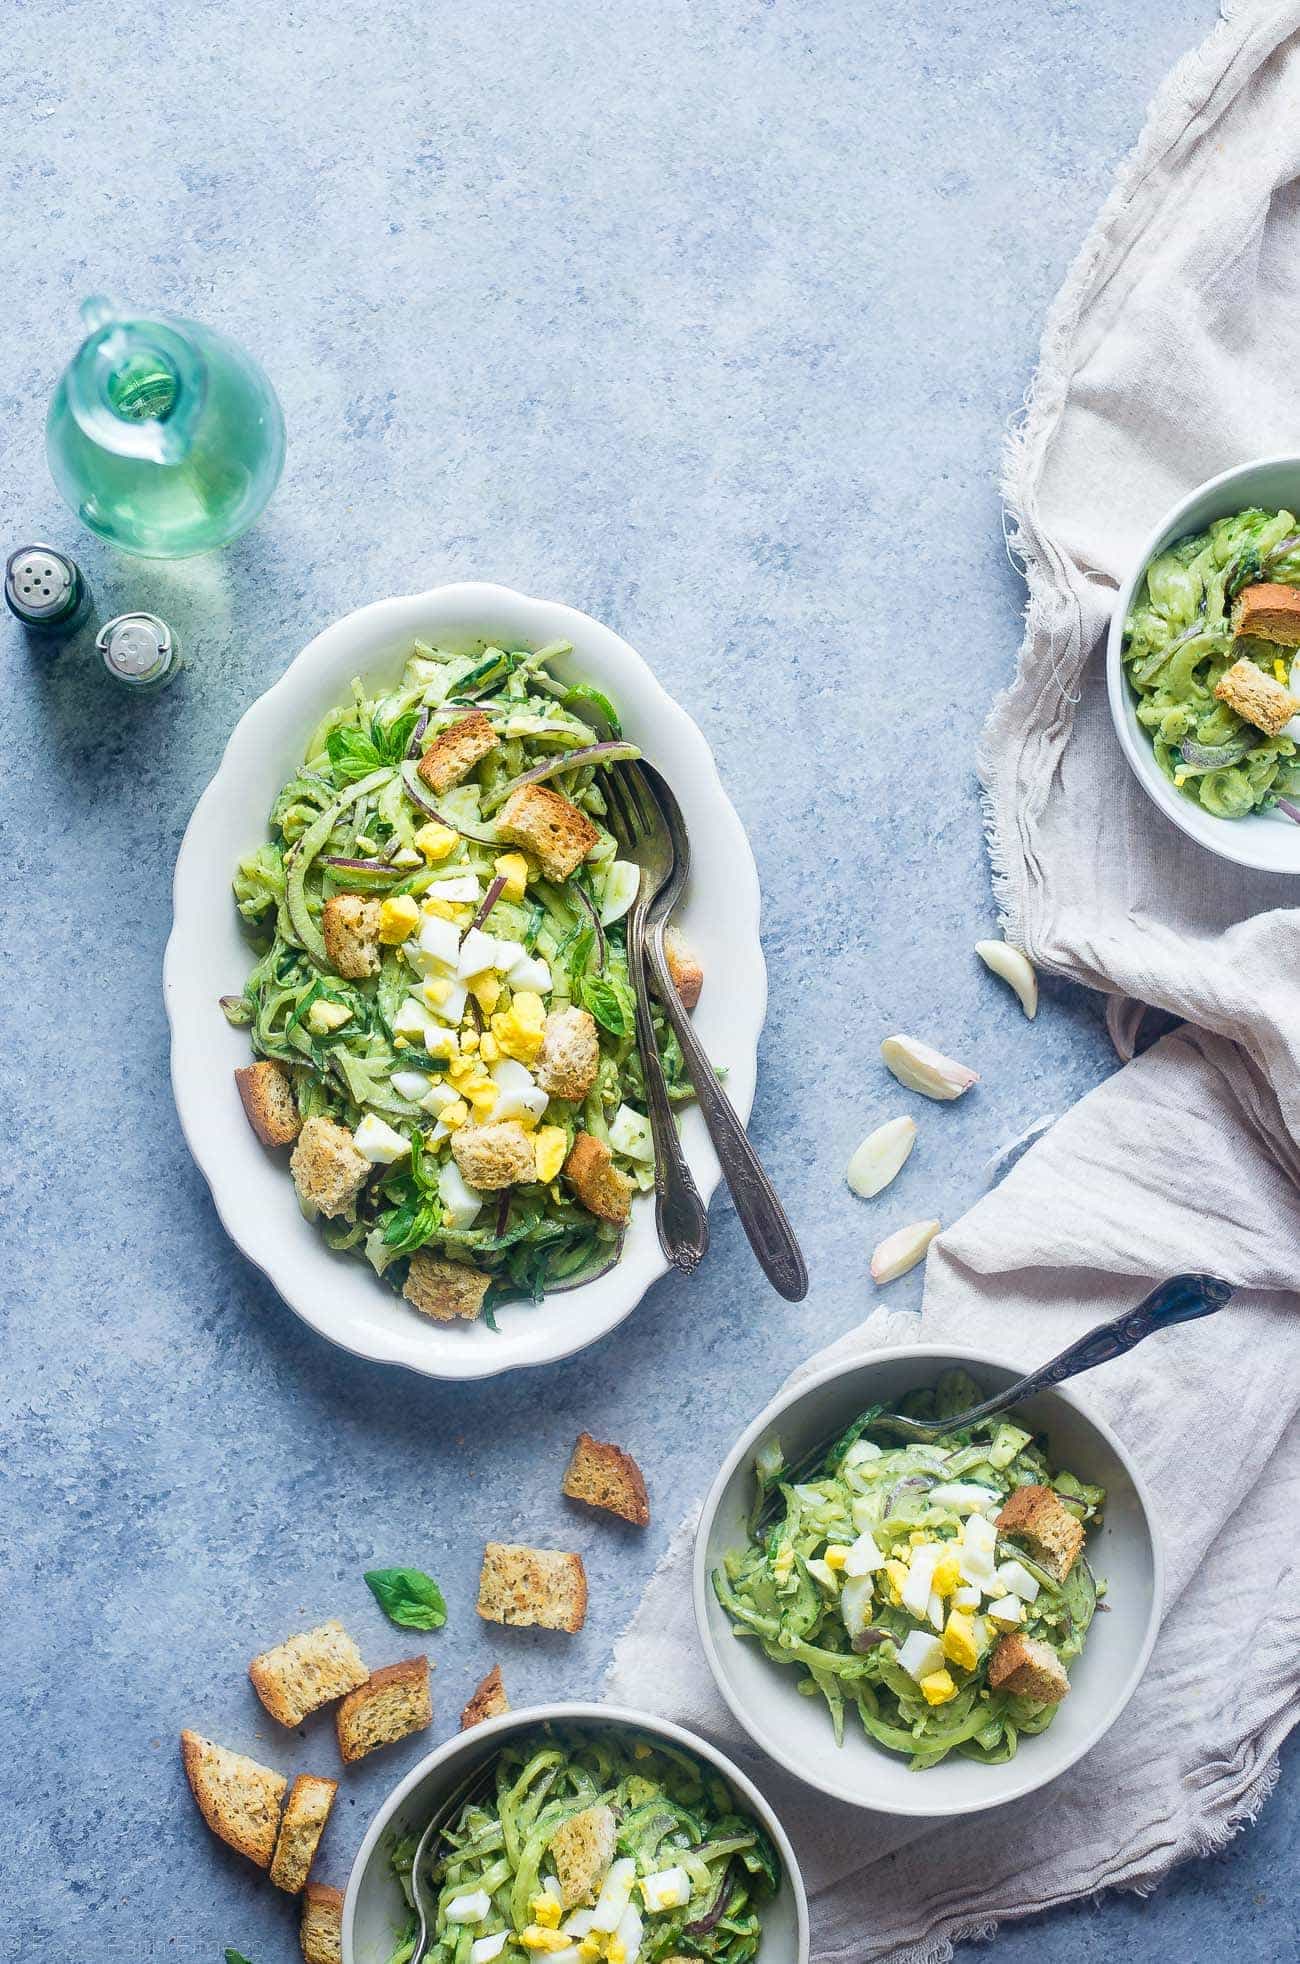 Avocado Pesto Zucchini Noodle Pasta Salad - This gluten free, healthy pasta salad uses zucchini noodles and has crunchy croutons and creamy avocado pesto! It's a low carb, easy spring side dish that's perfect for Easter! | Foodfaithfitness.com | @FoodFaithFit